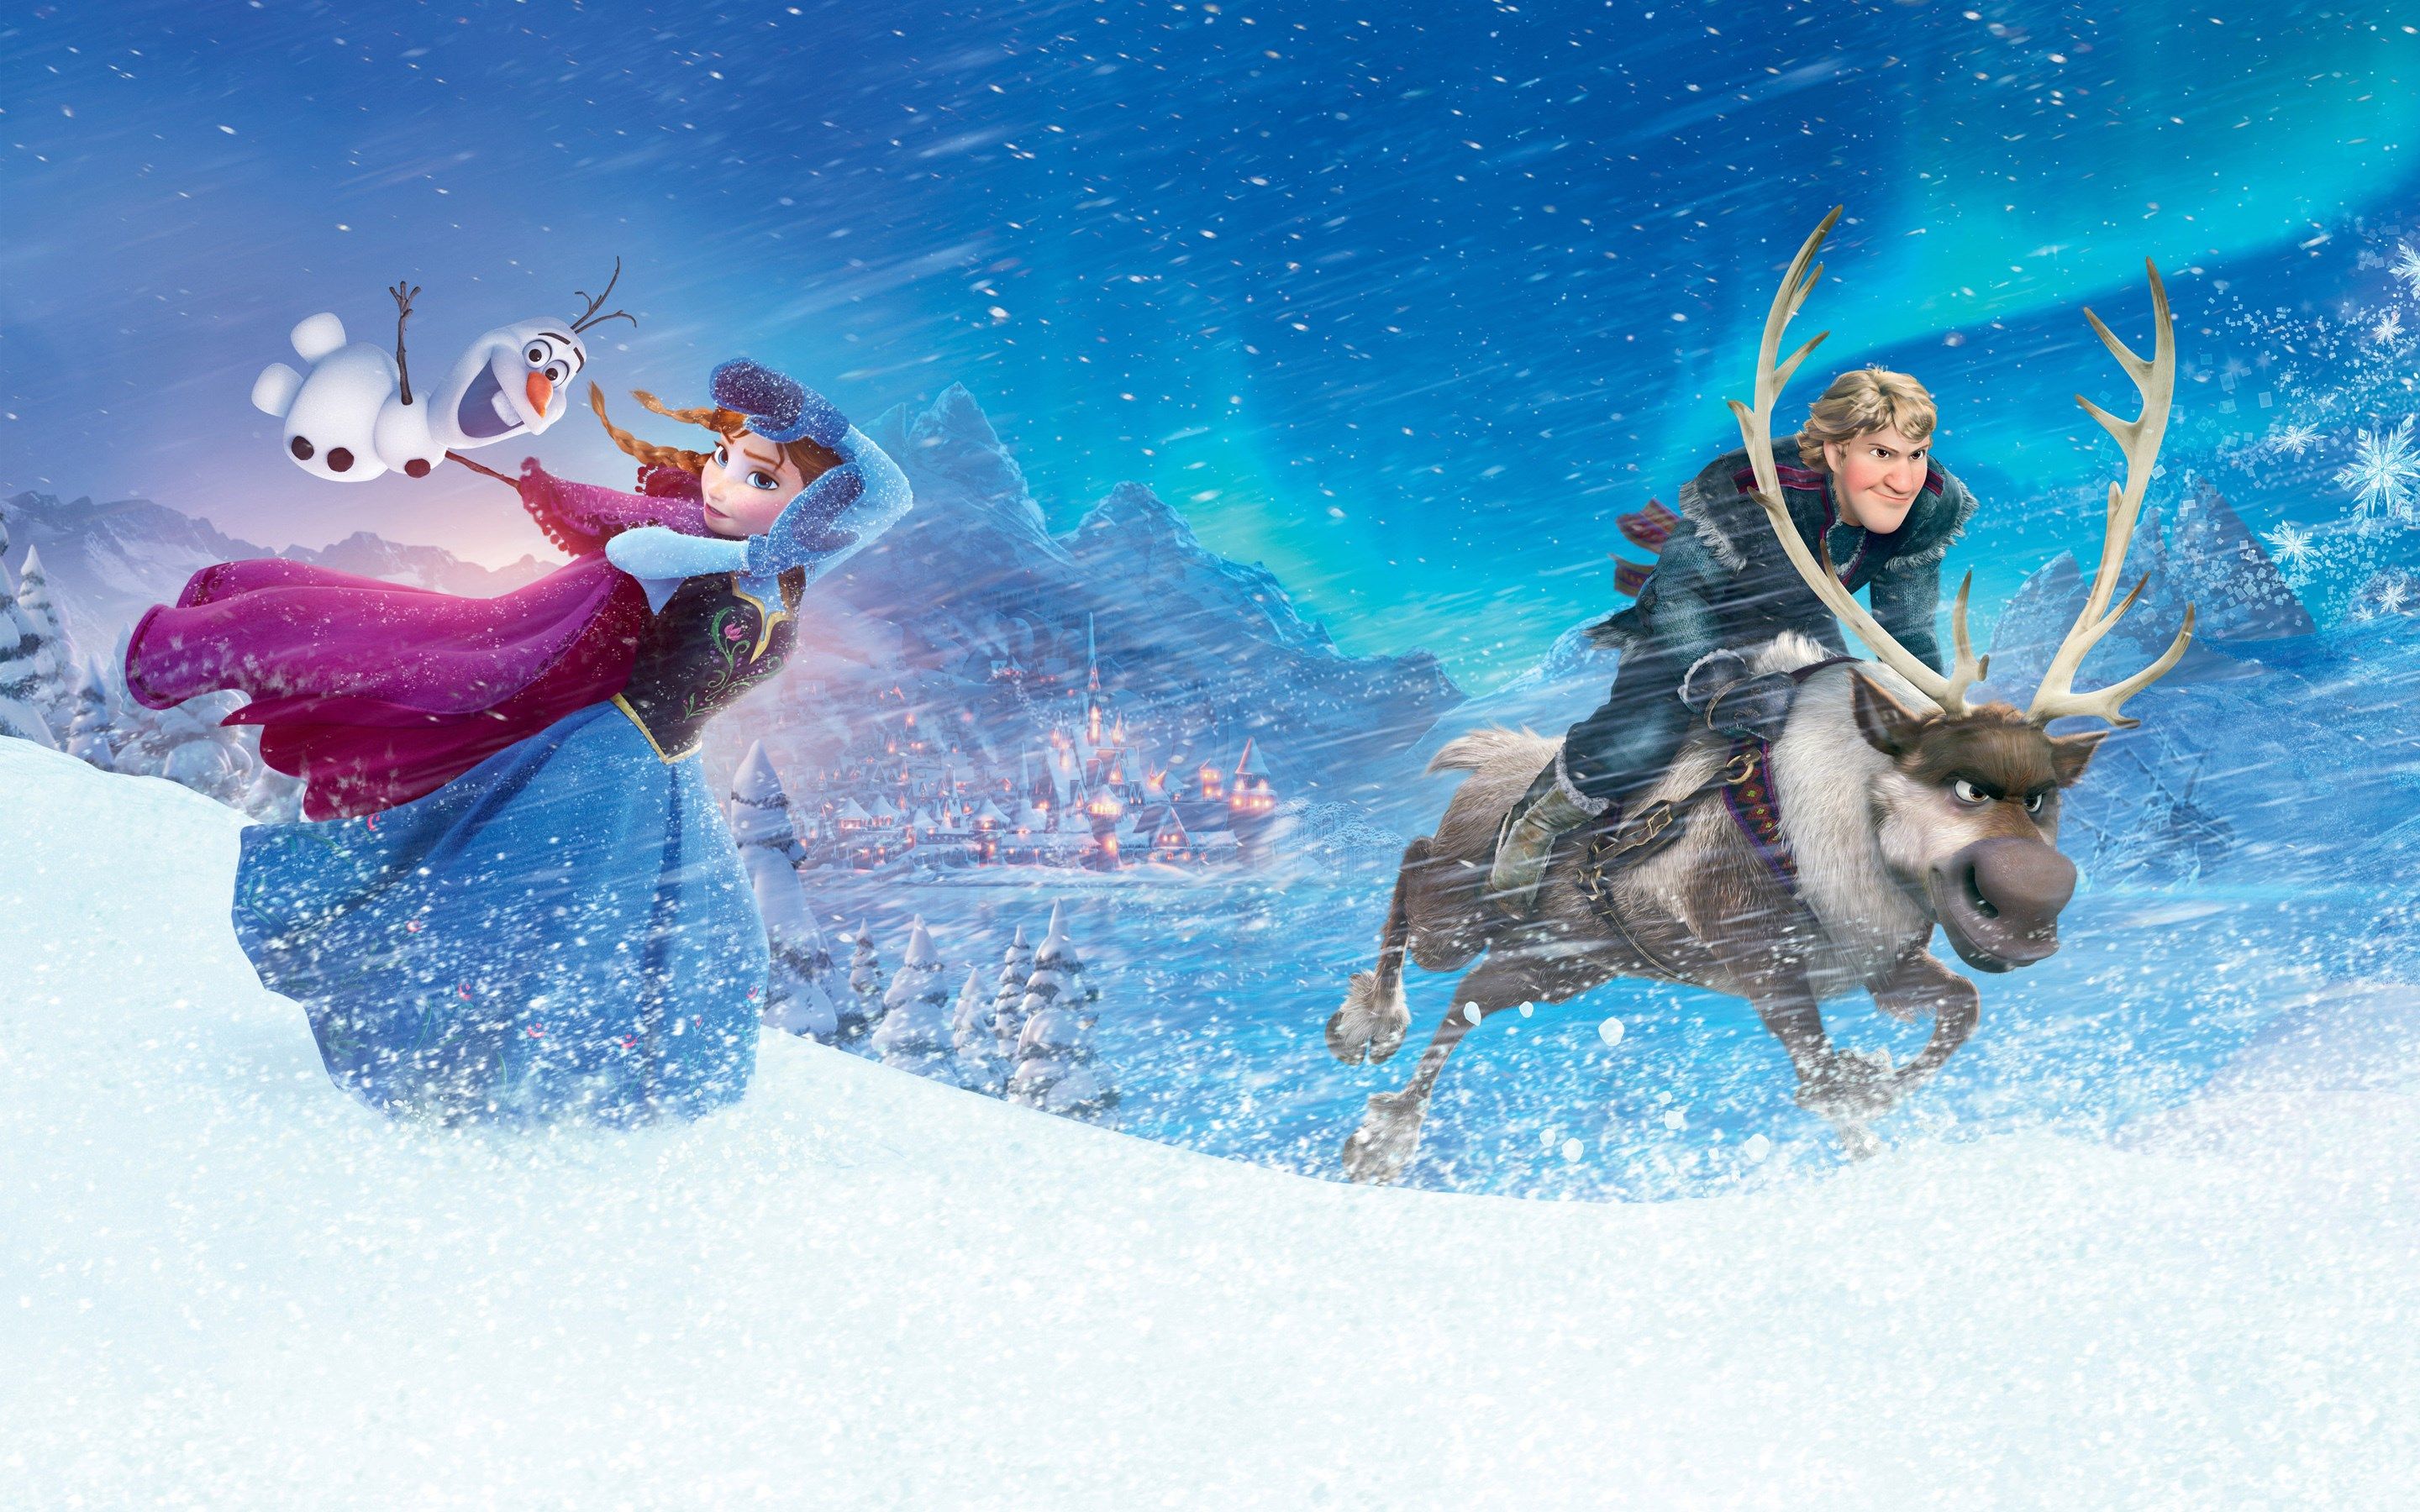 Frozen Theme Background Image Category With